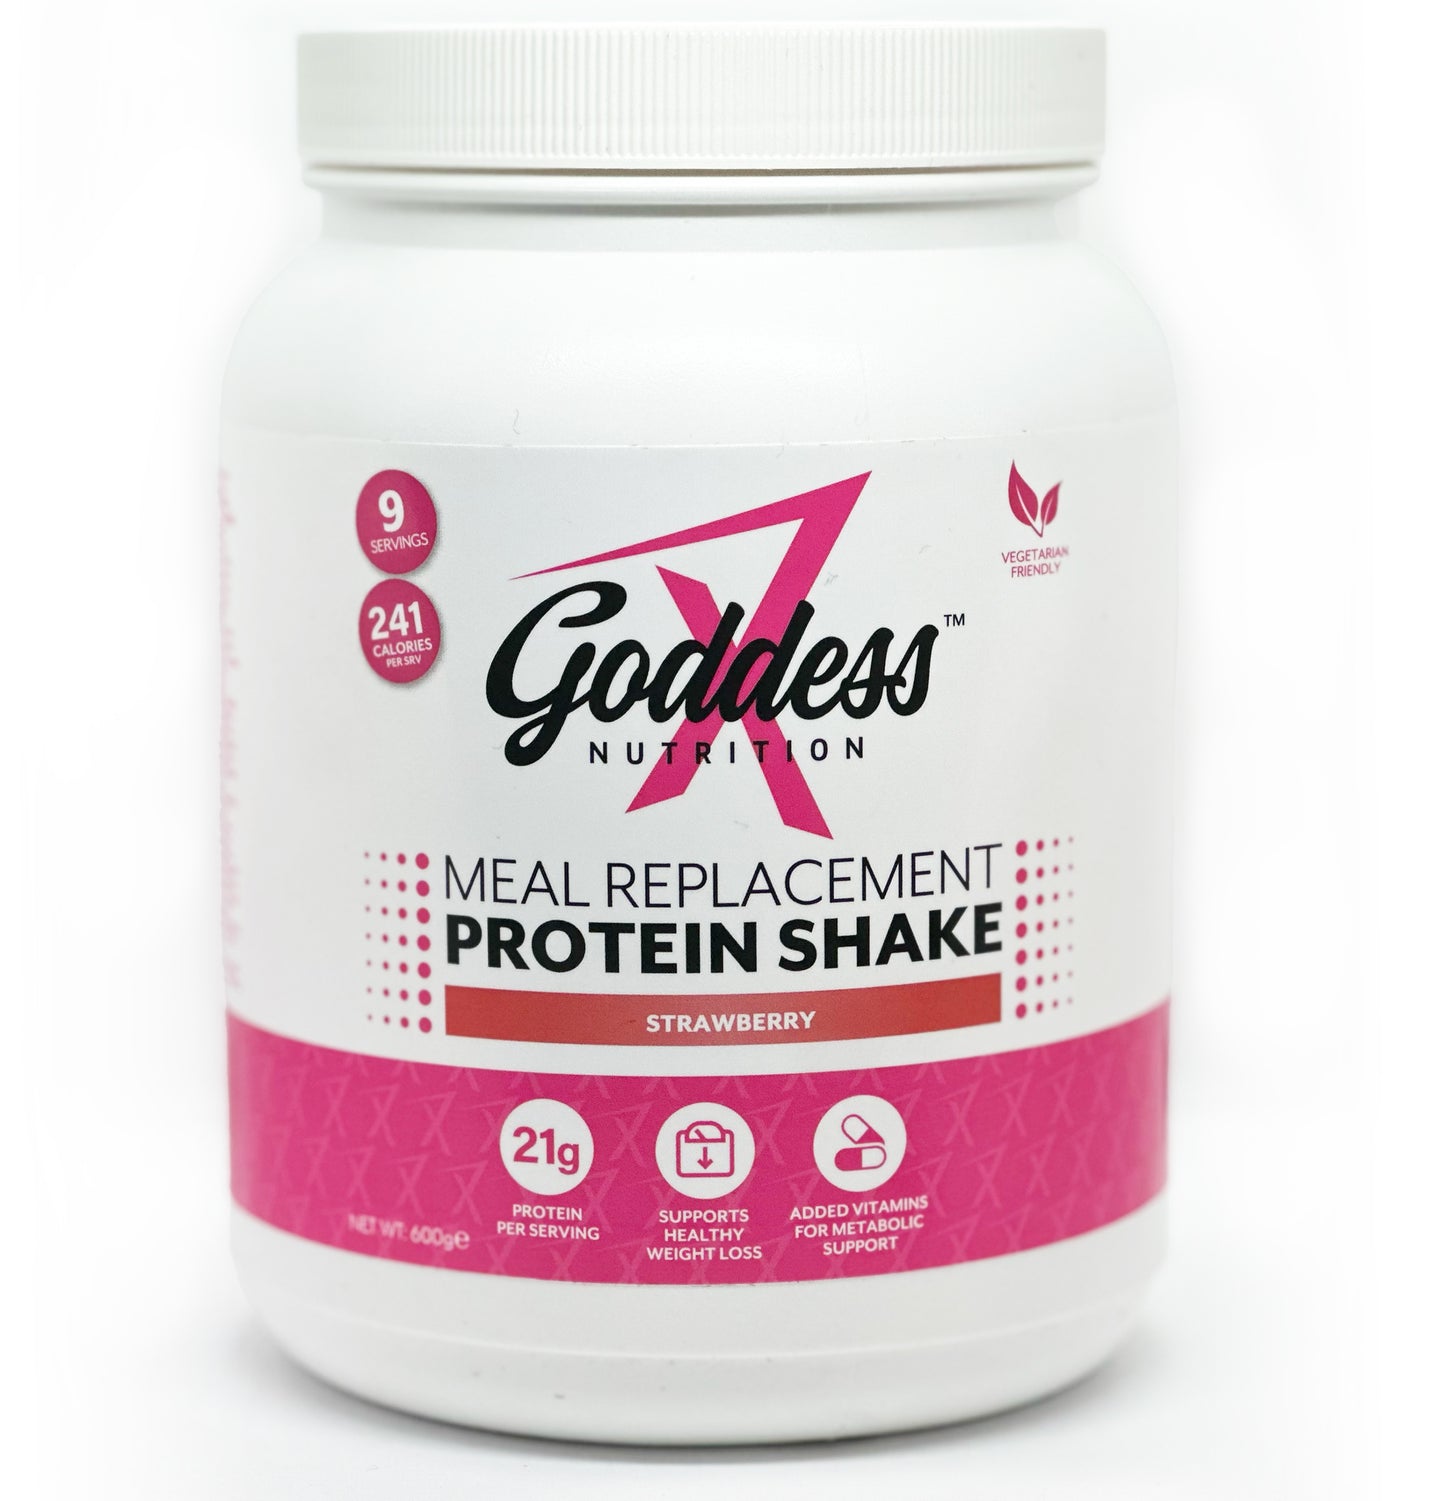 Meal Replacement Protein Shake by Goddess Nutrition - Strawberry Flavour